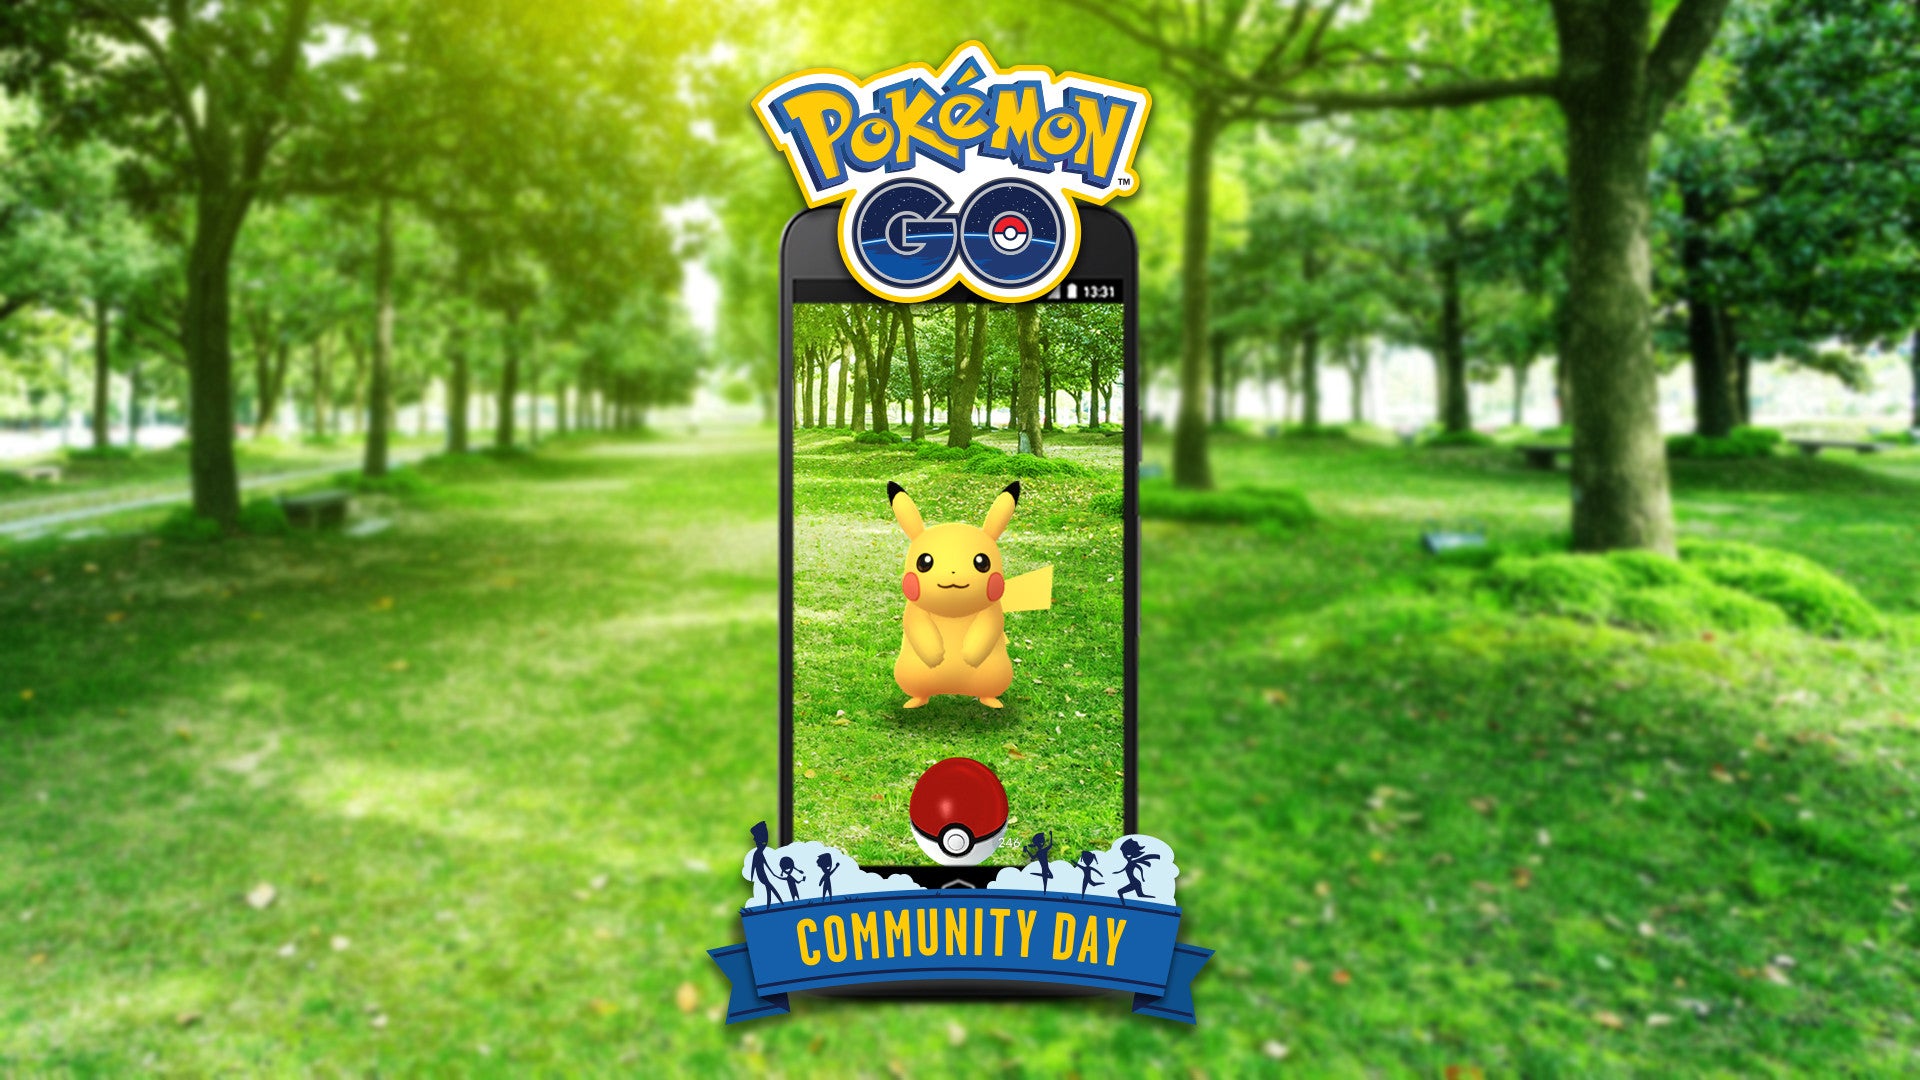 Pokemon GO adds Community Day monthly event starring a special Pokemon